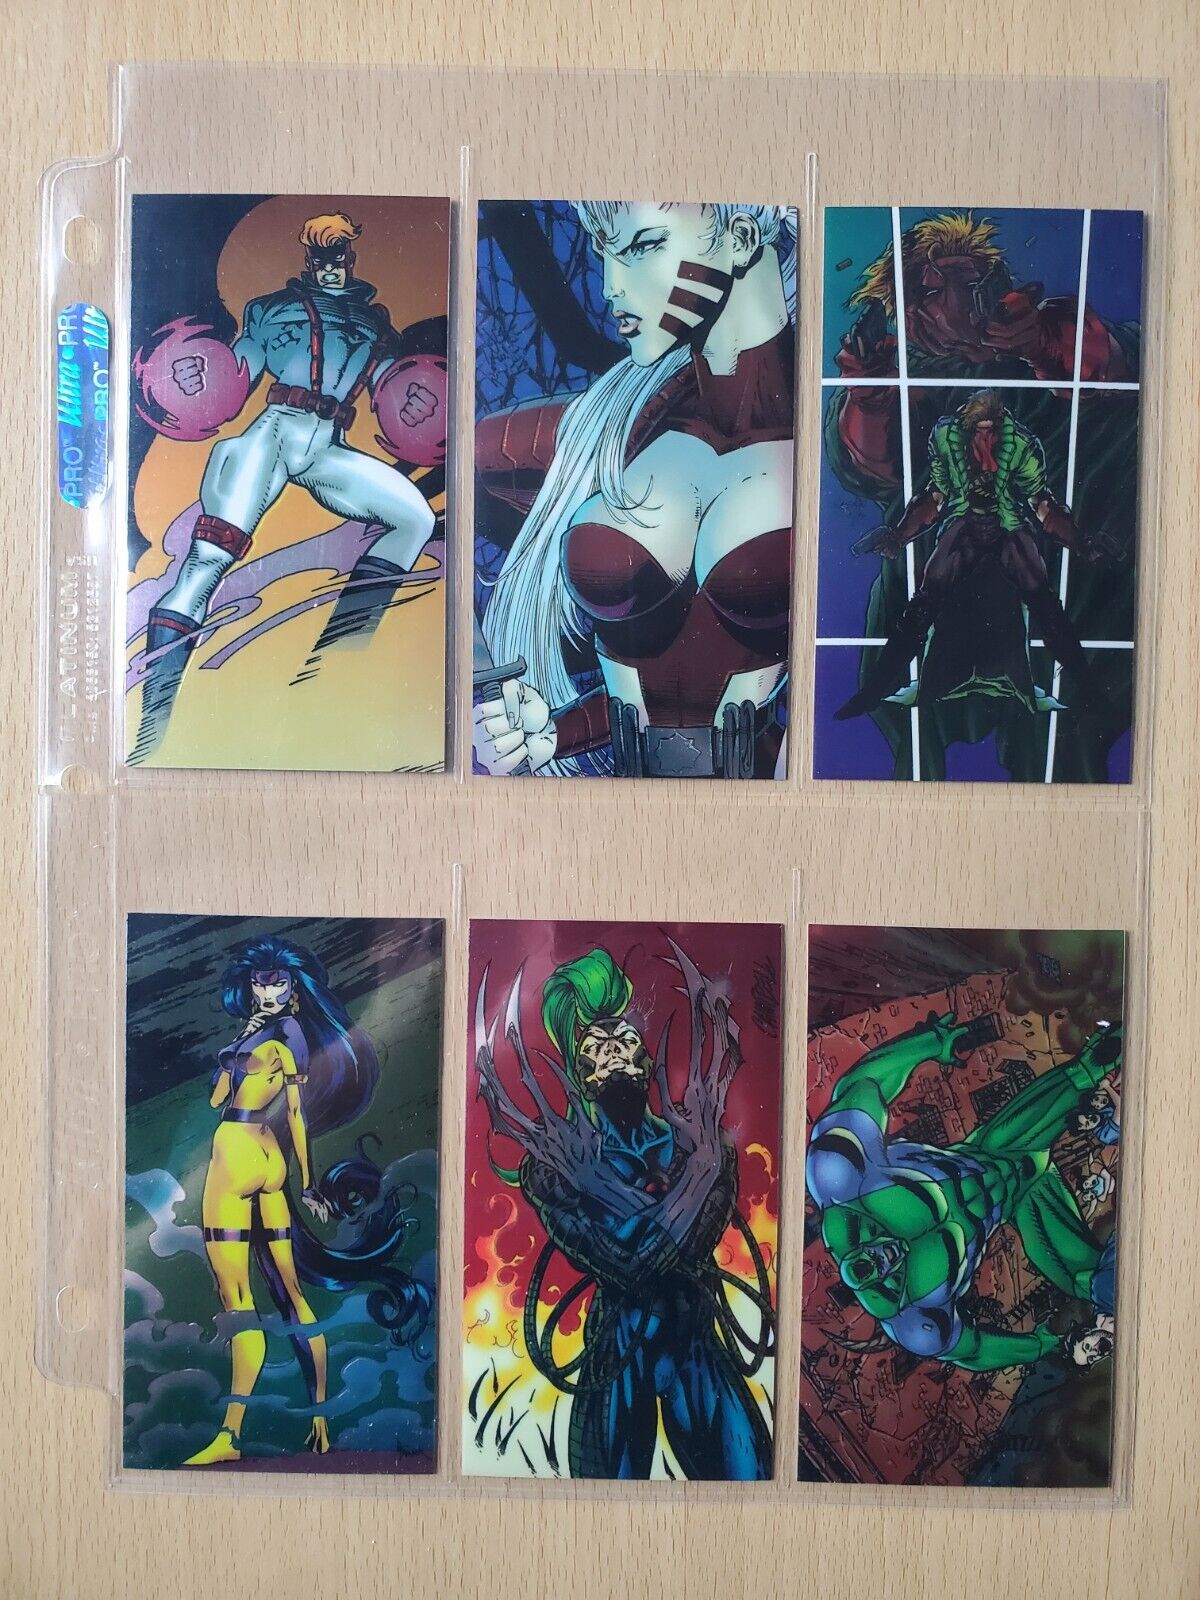 1994 WILD.C.A.T.S  CHROMIUM OVERSIZE  COMPLETE SET OF 96 TRADING CARDS